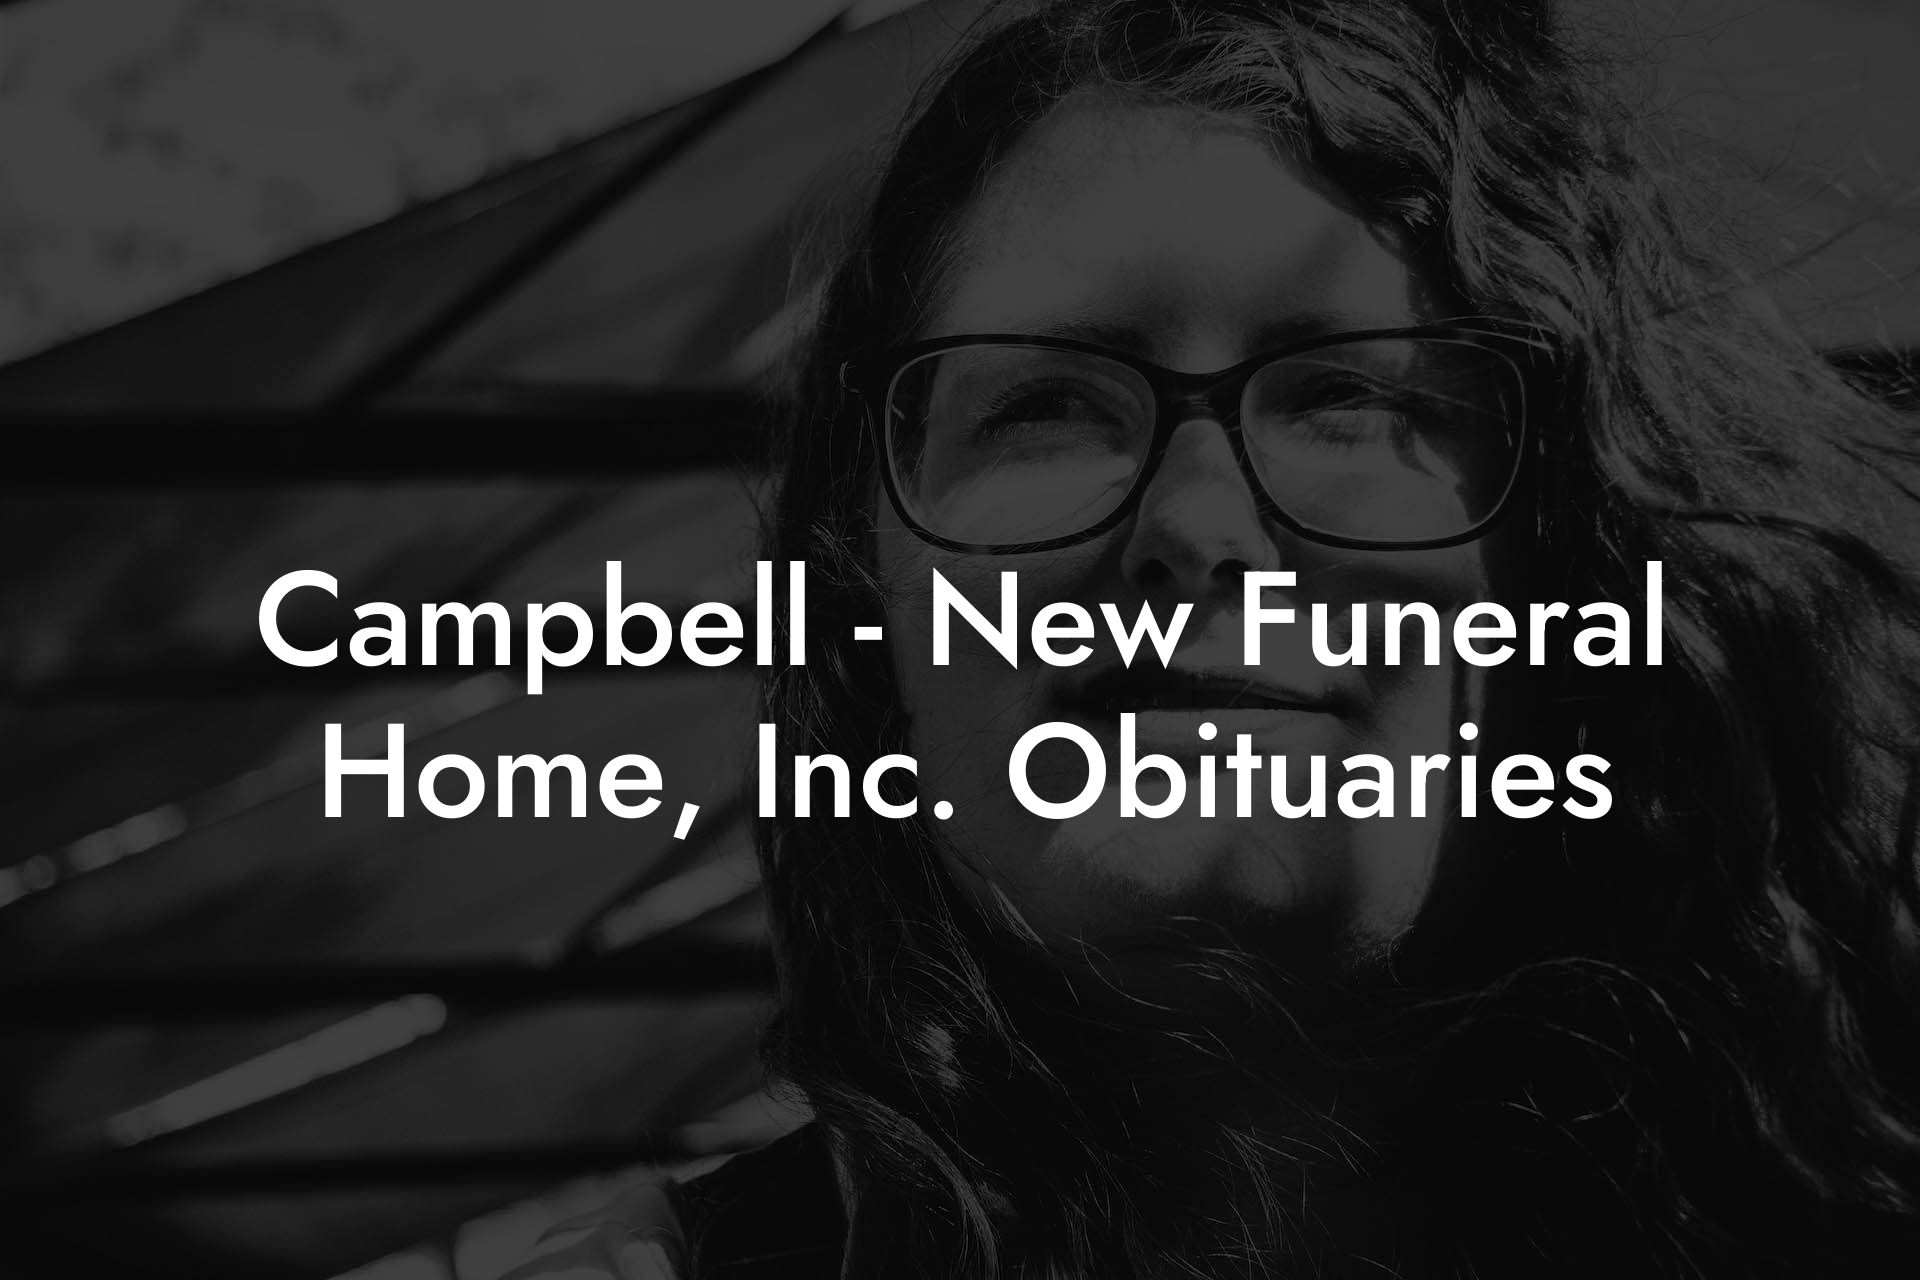 Campbell - New Funeral Home, Inc. Obituaries